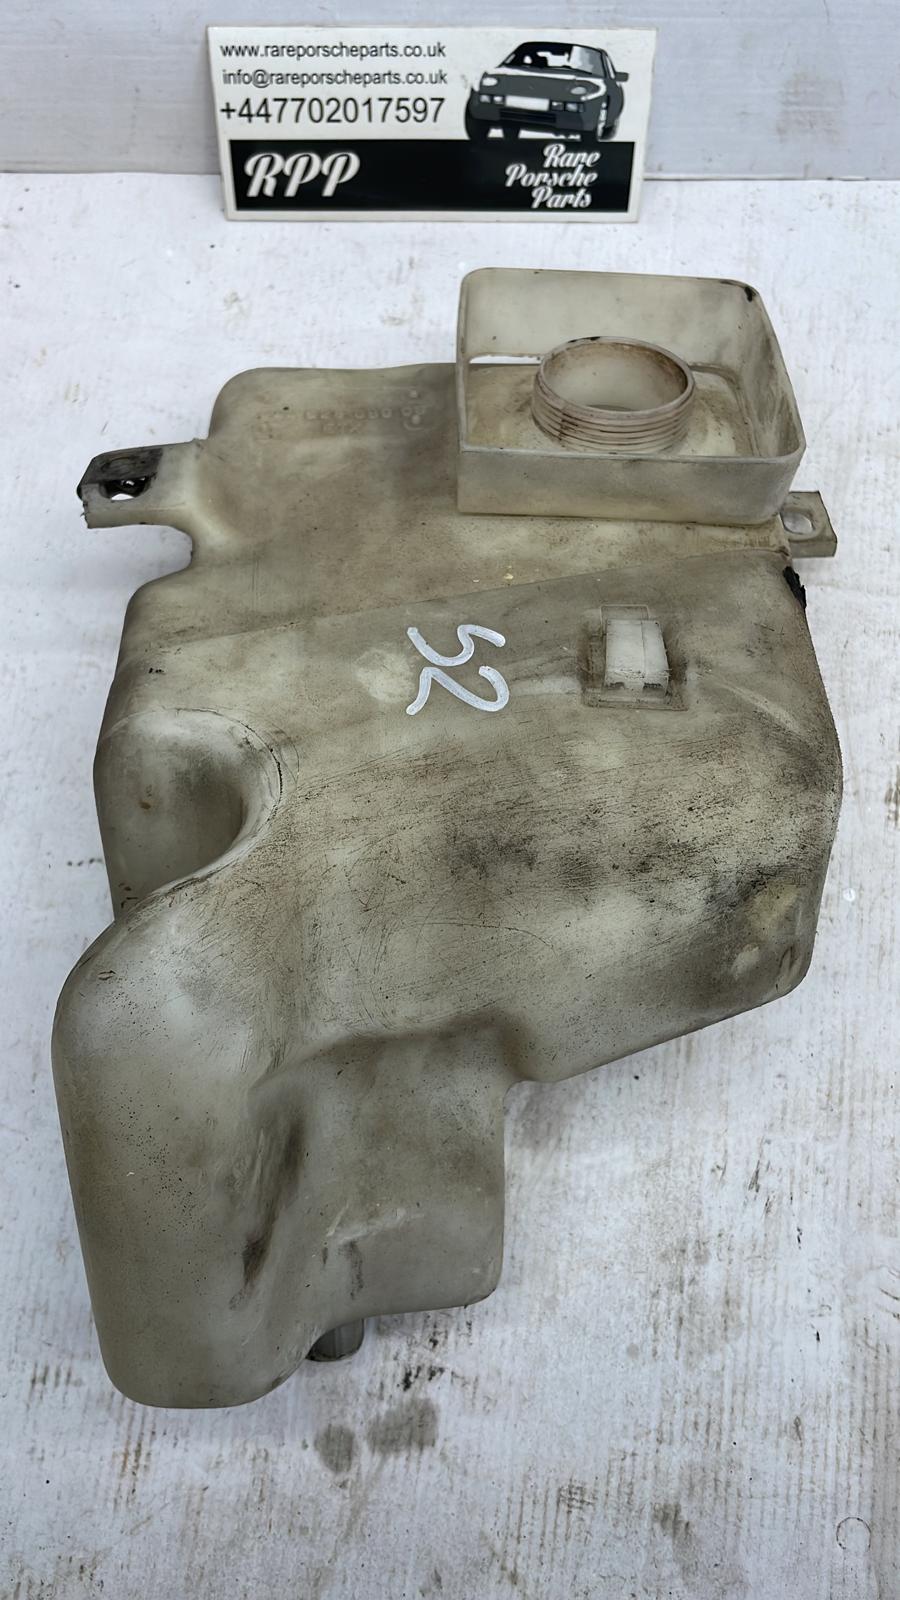 Porsche 944 Turbo/S2 Windscreen Washer Bottle Fluid Reservoir without Headlamp Washer System, used 944 628 060 00